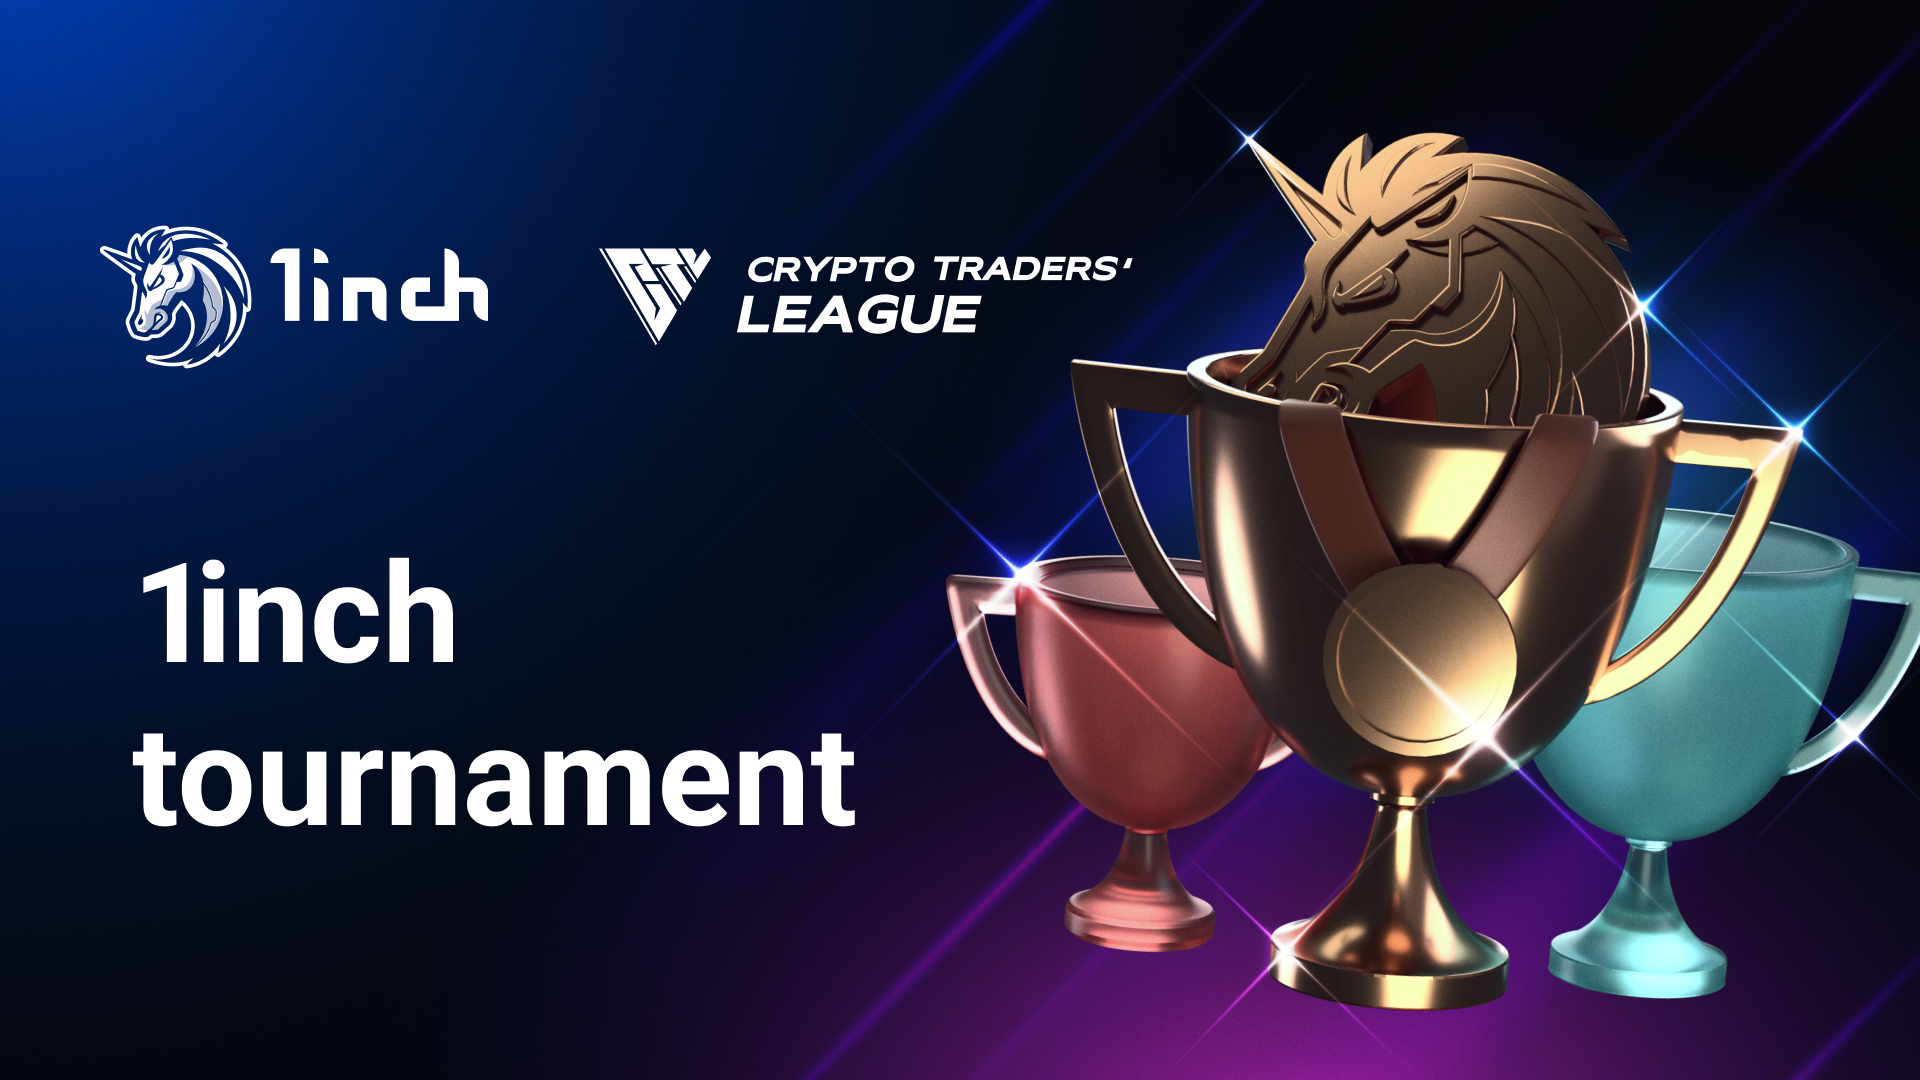 Crypto Traders’ League to launch a 1inch tournament